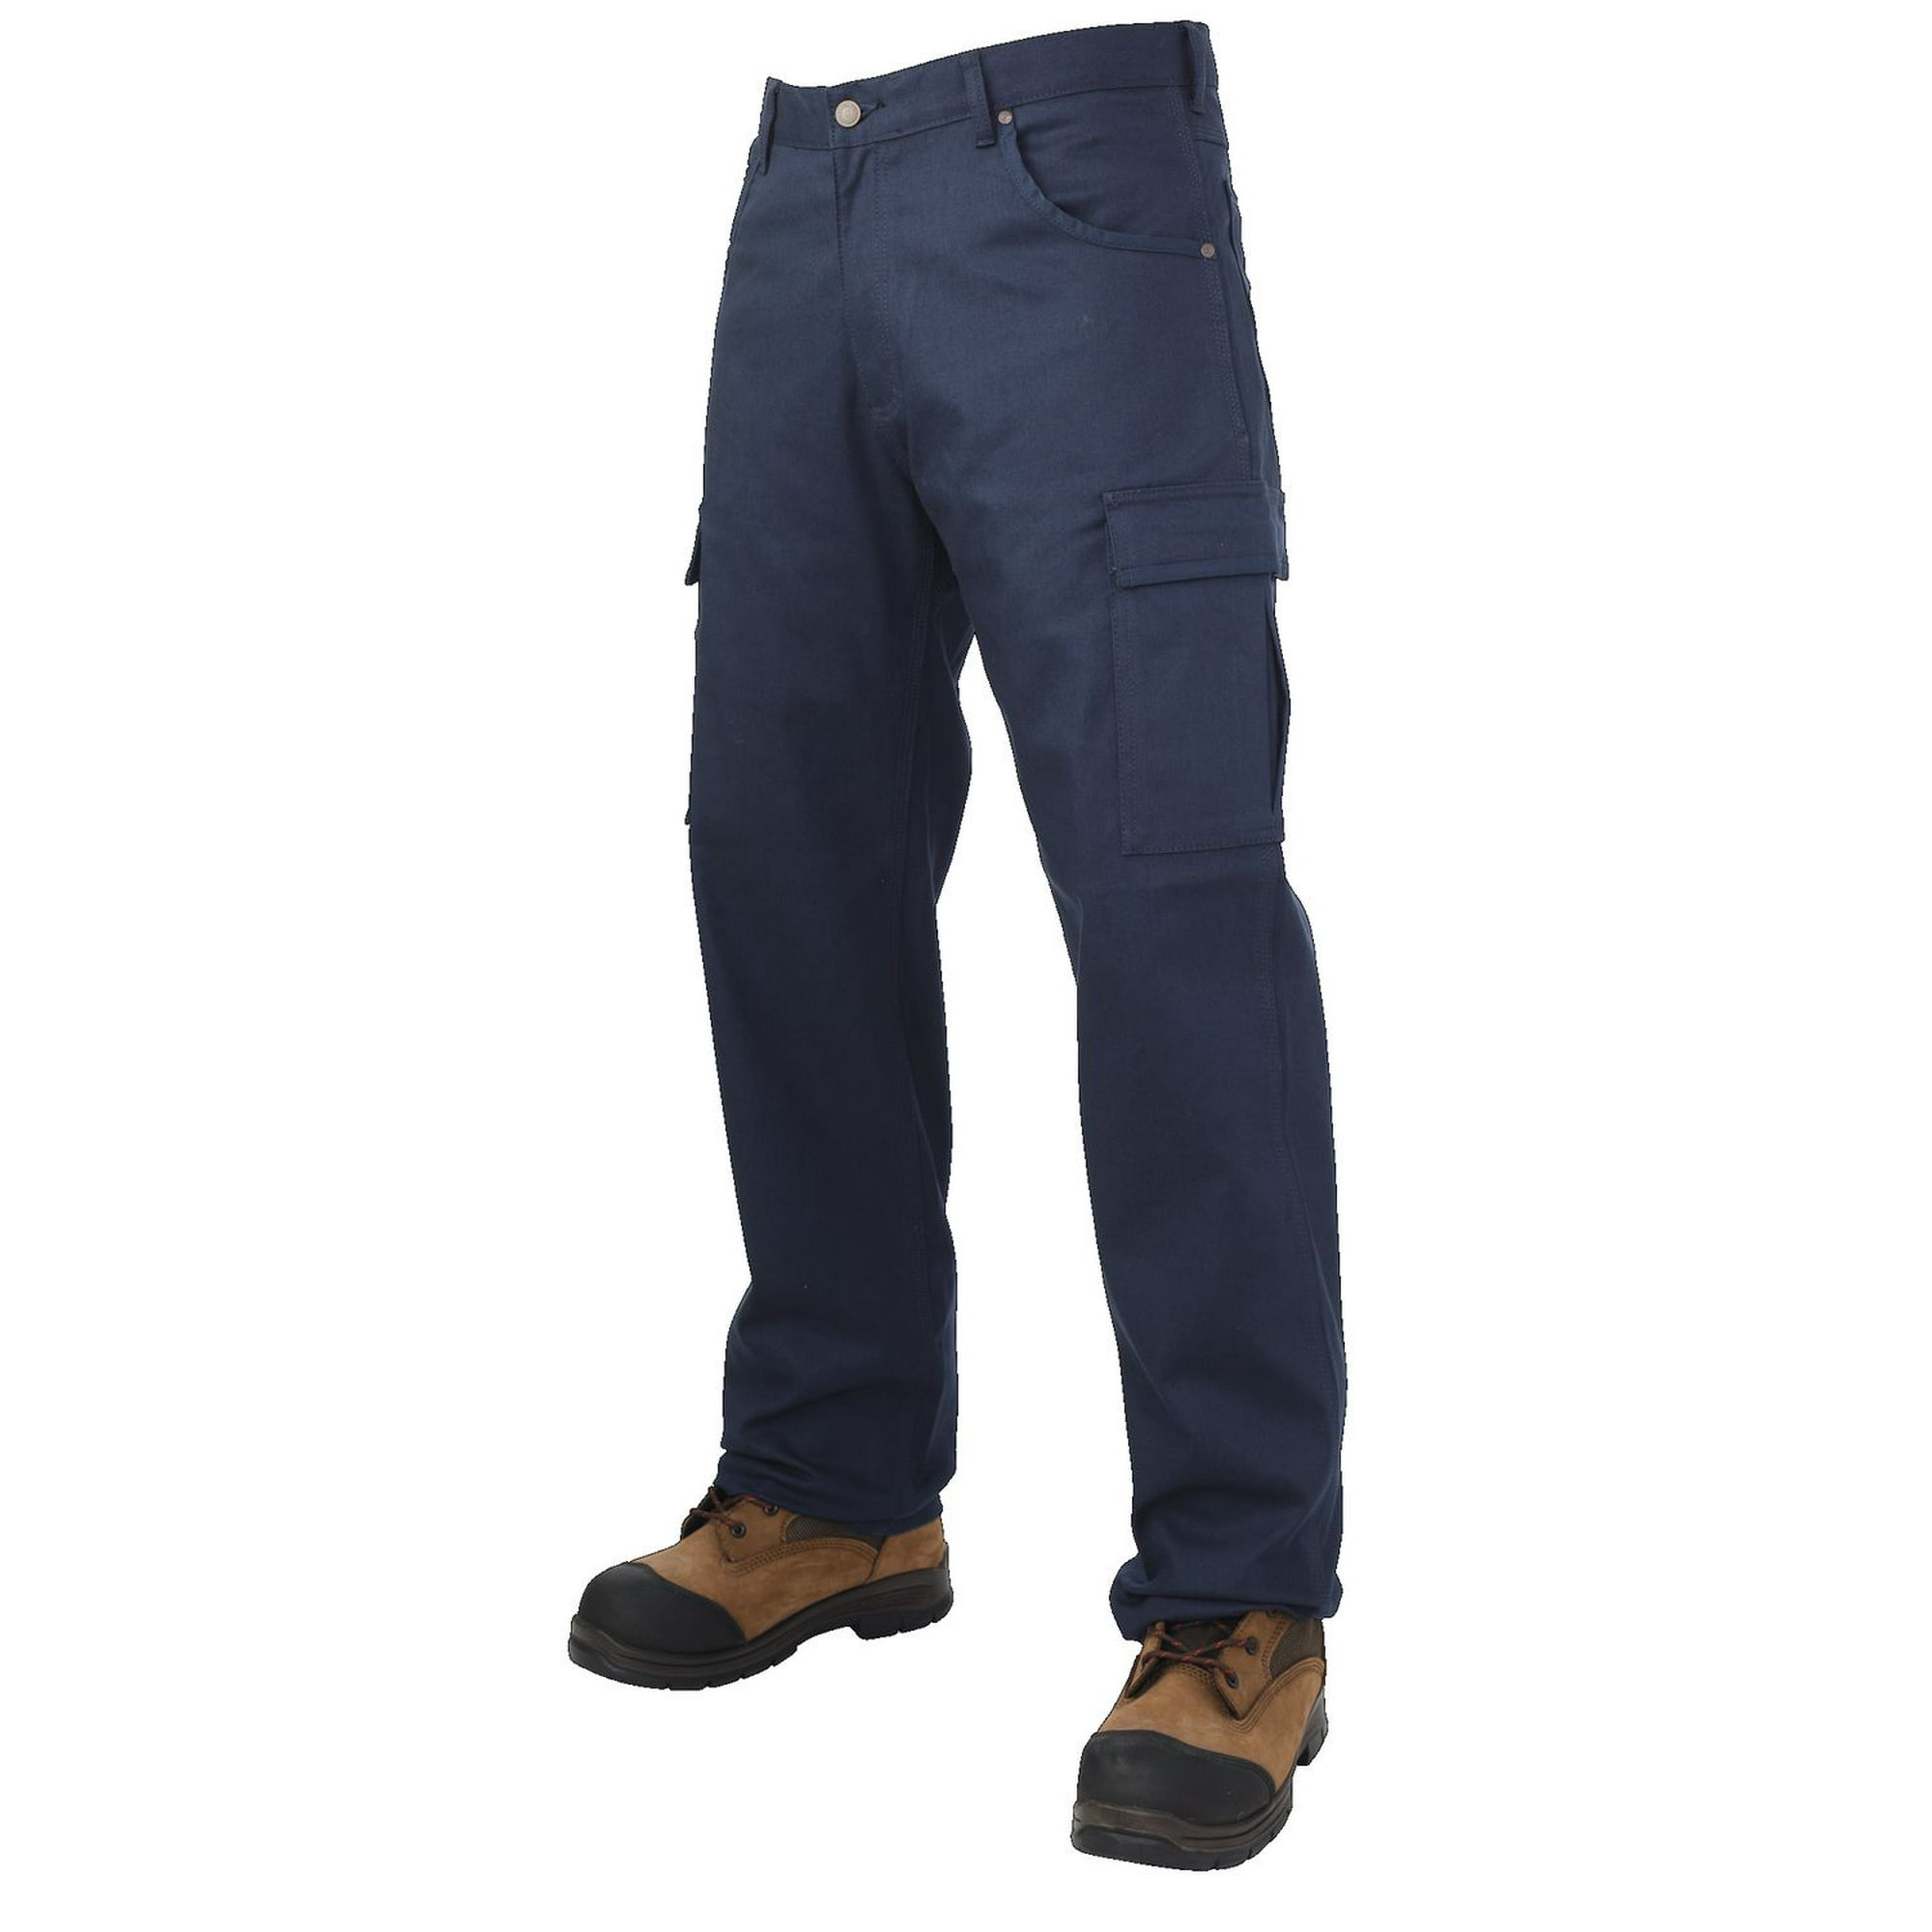 Buy Navy Blue Side Pocket Straight Cargo Pants Cotton for Best Price,  Reviews, Free Shipping